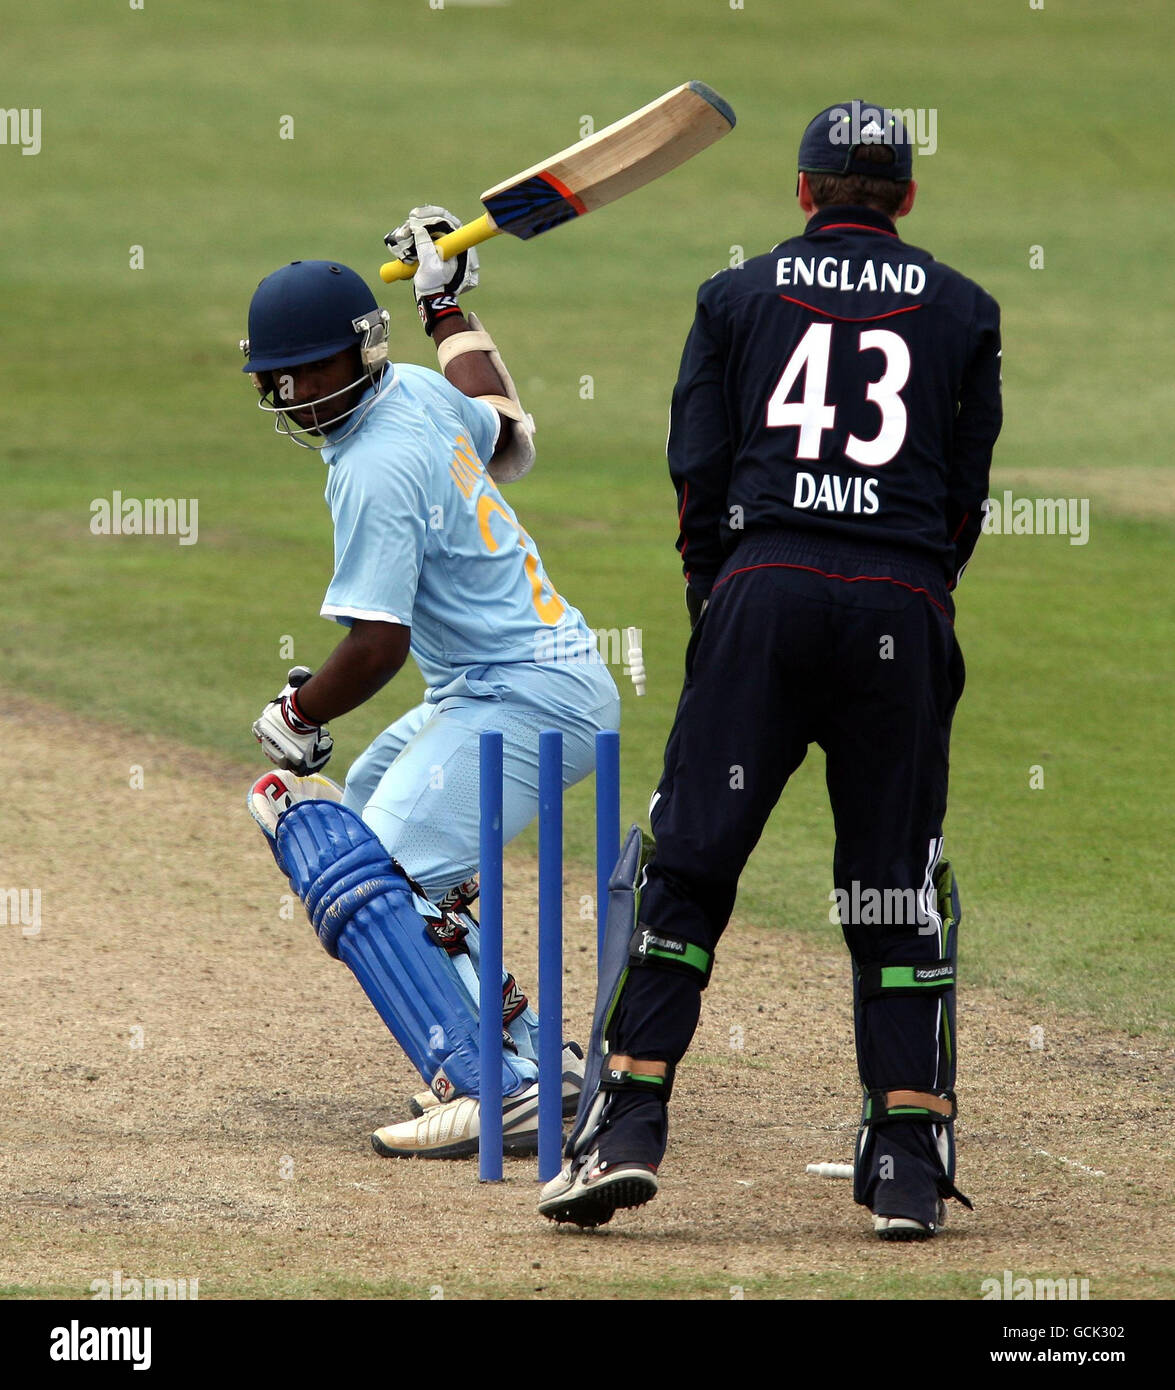 Cricket - Tour Match - England Lions v India A - New Road. India's Abhinav Mukund is bowled by Ravi Bopara for 113 during the tour match at New Road, Worcester. Stock Photo